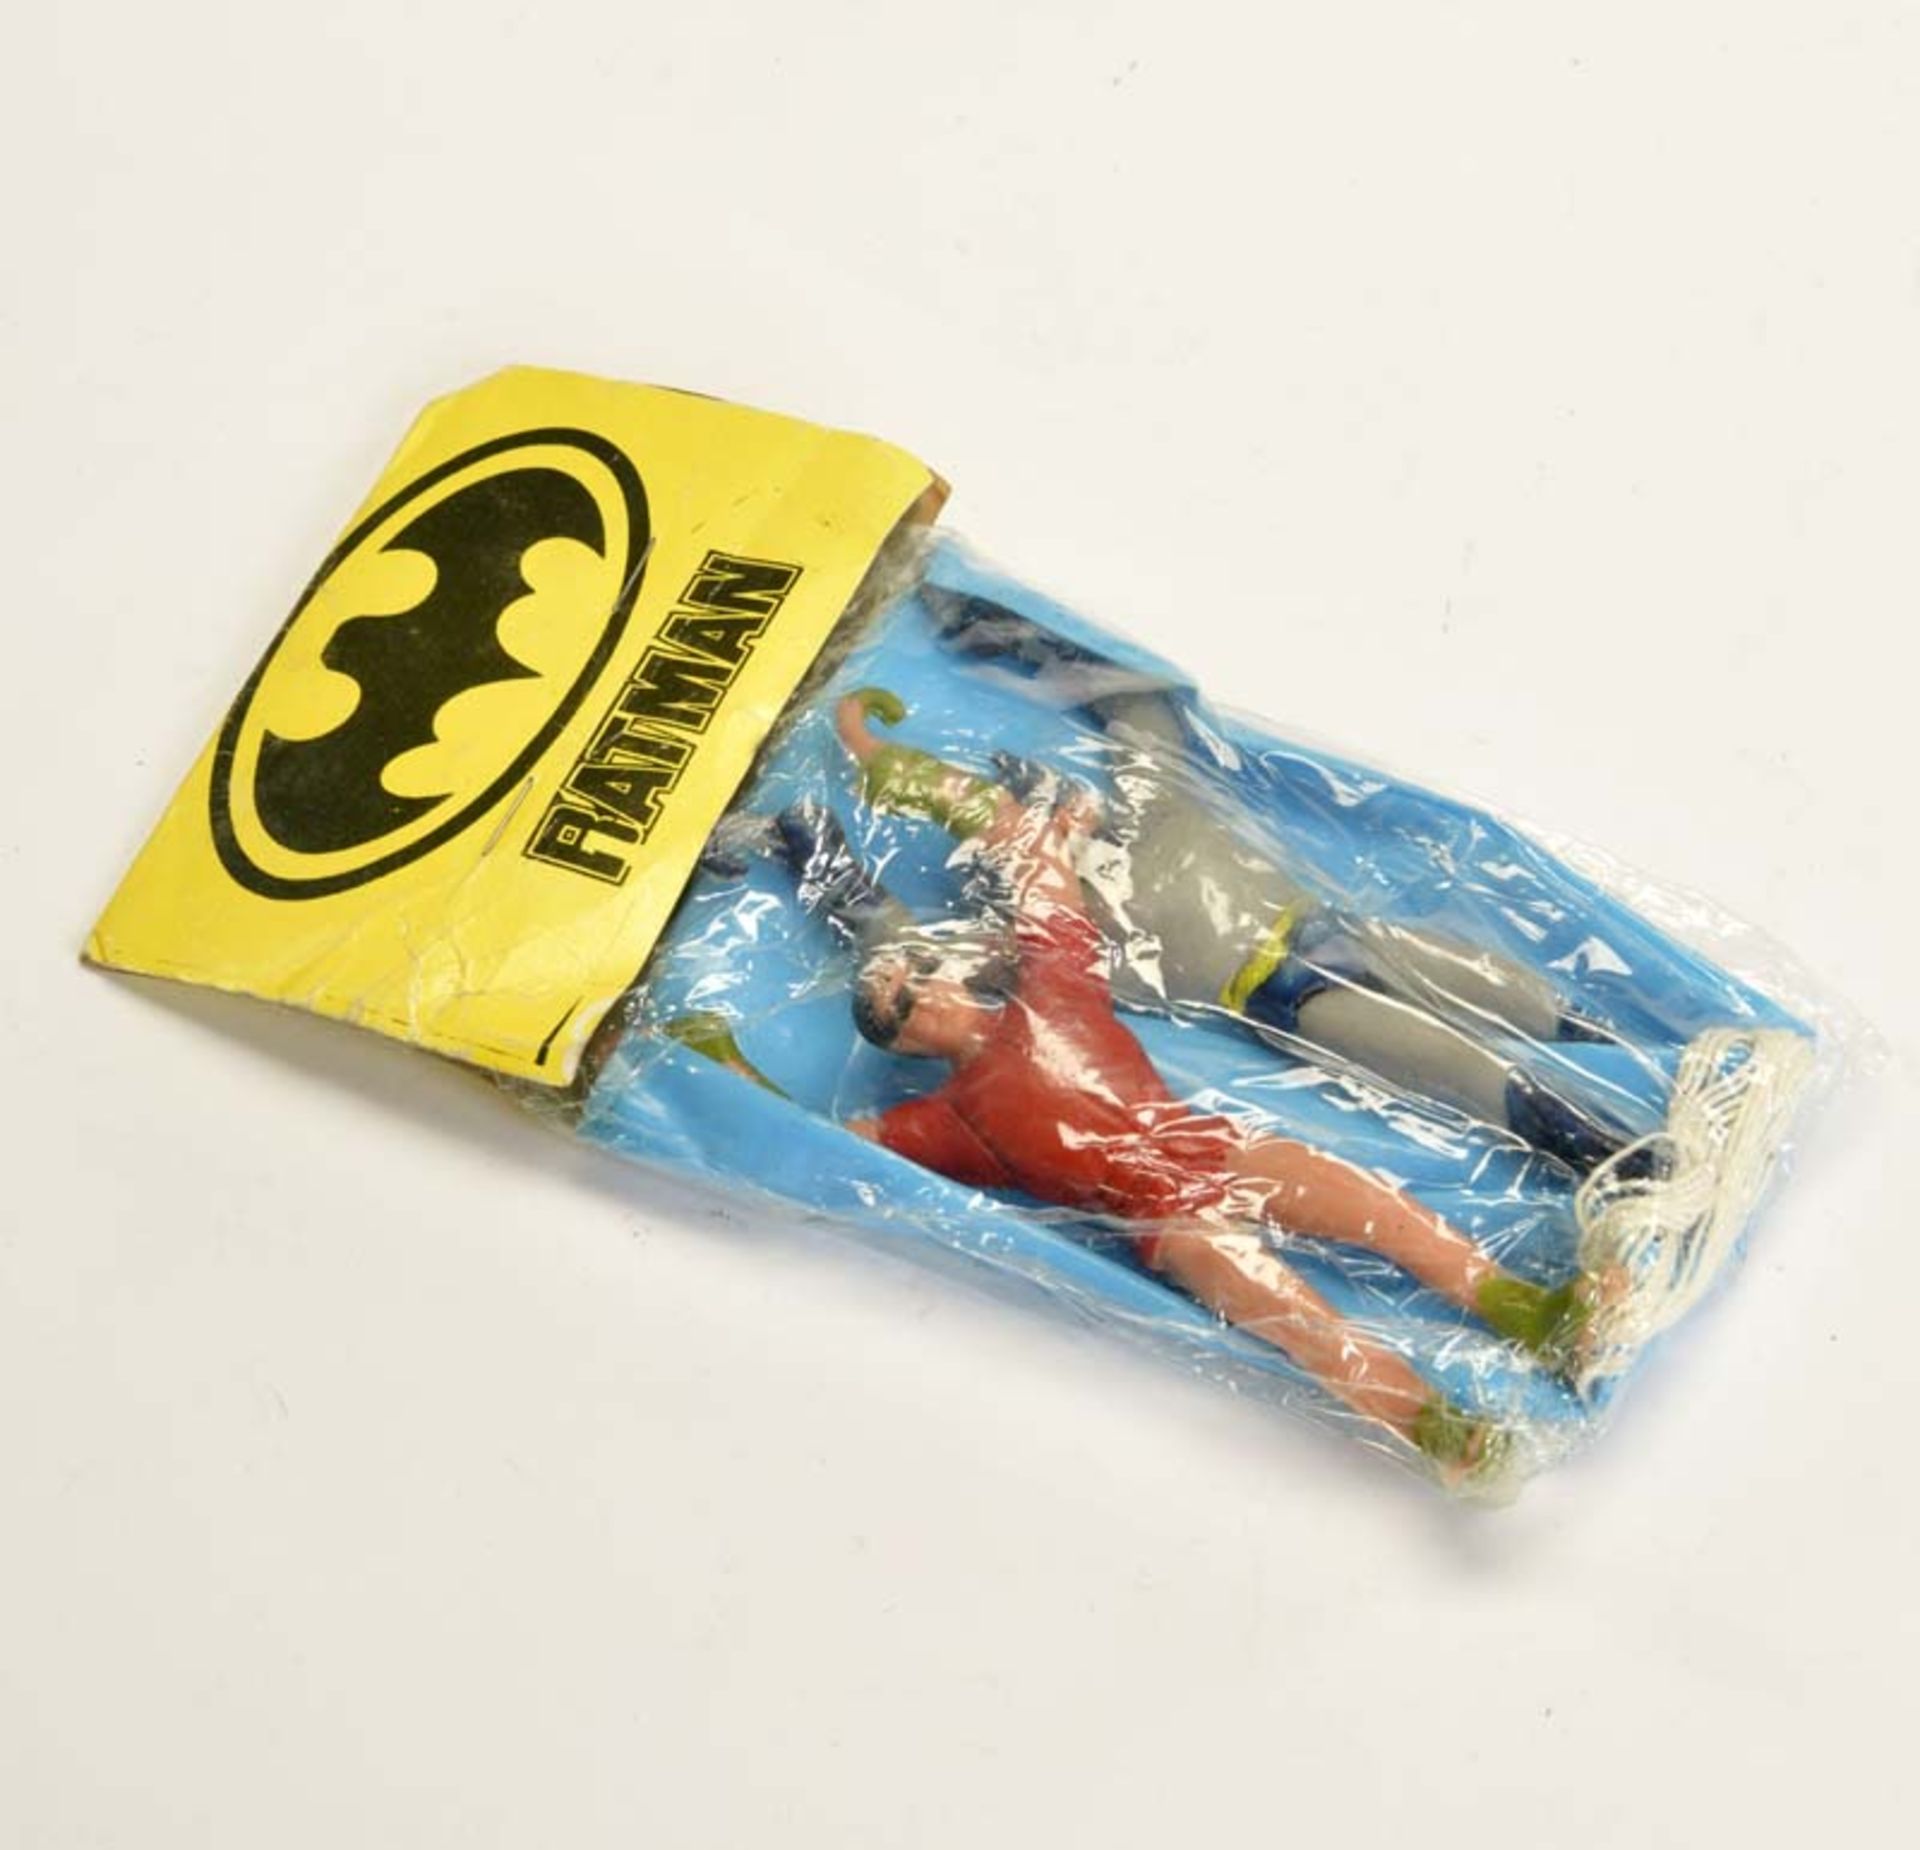 Batman + Robin Figures out of Rubber with Parachute, Mexico, original box (min. traces of age)